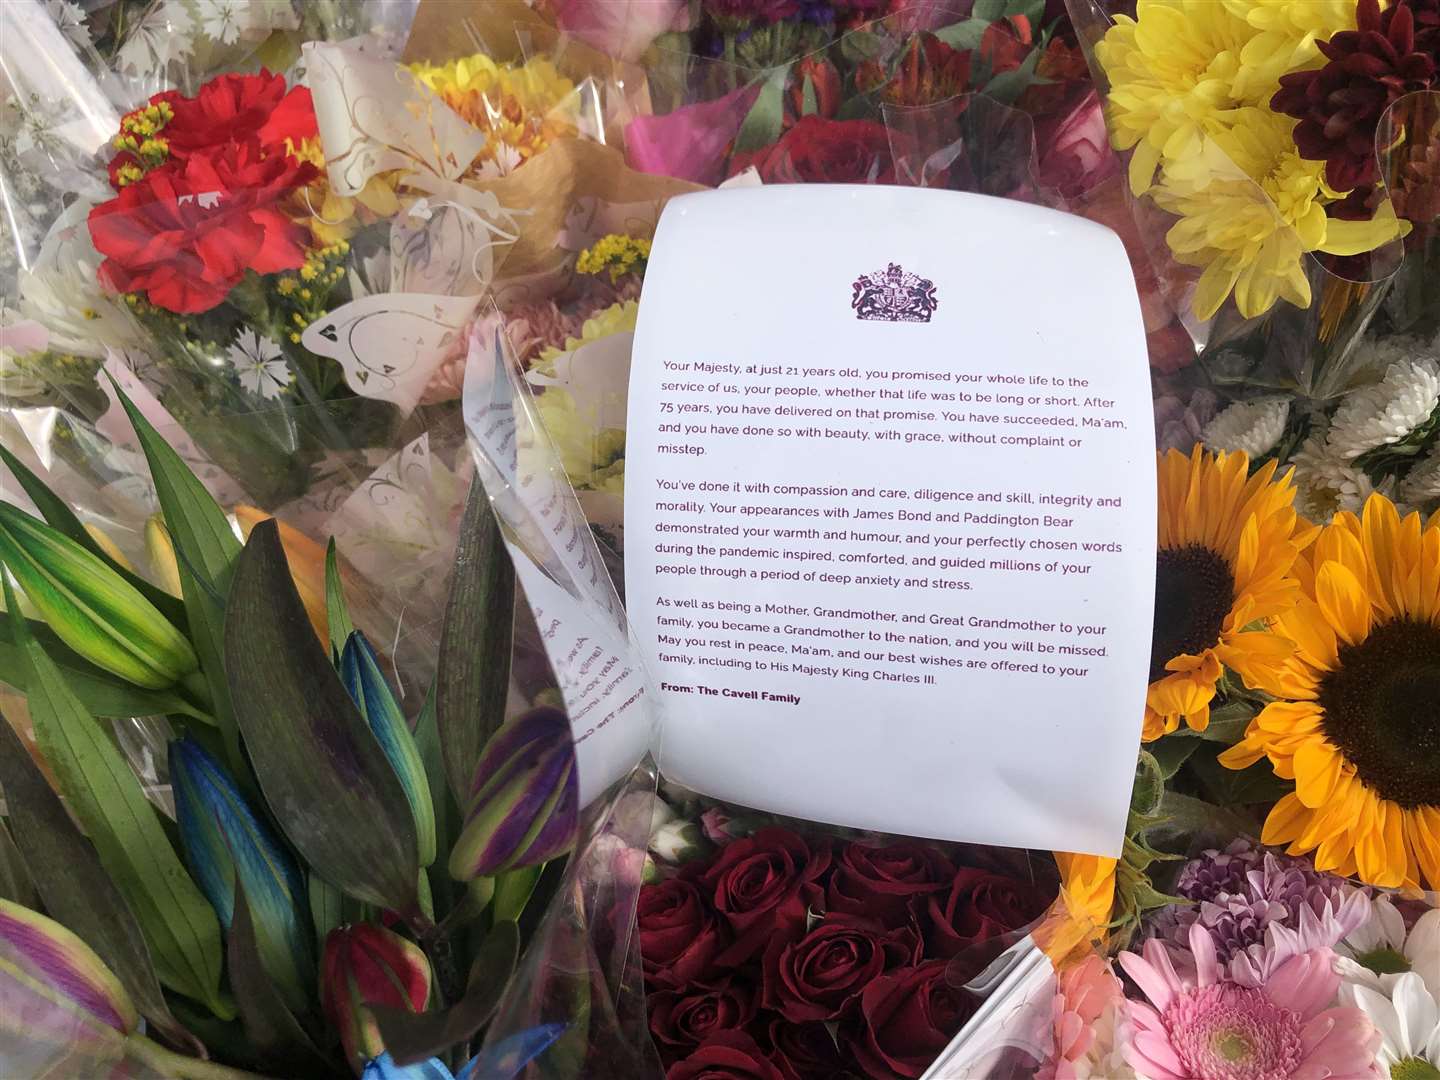 Many have left their messages of thanks and condolences